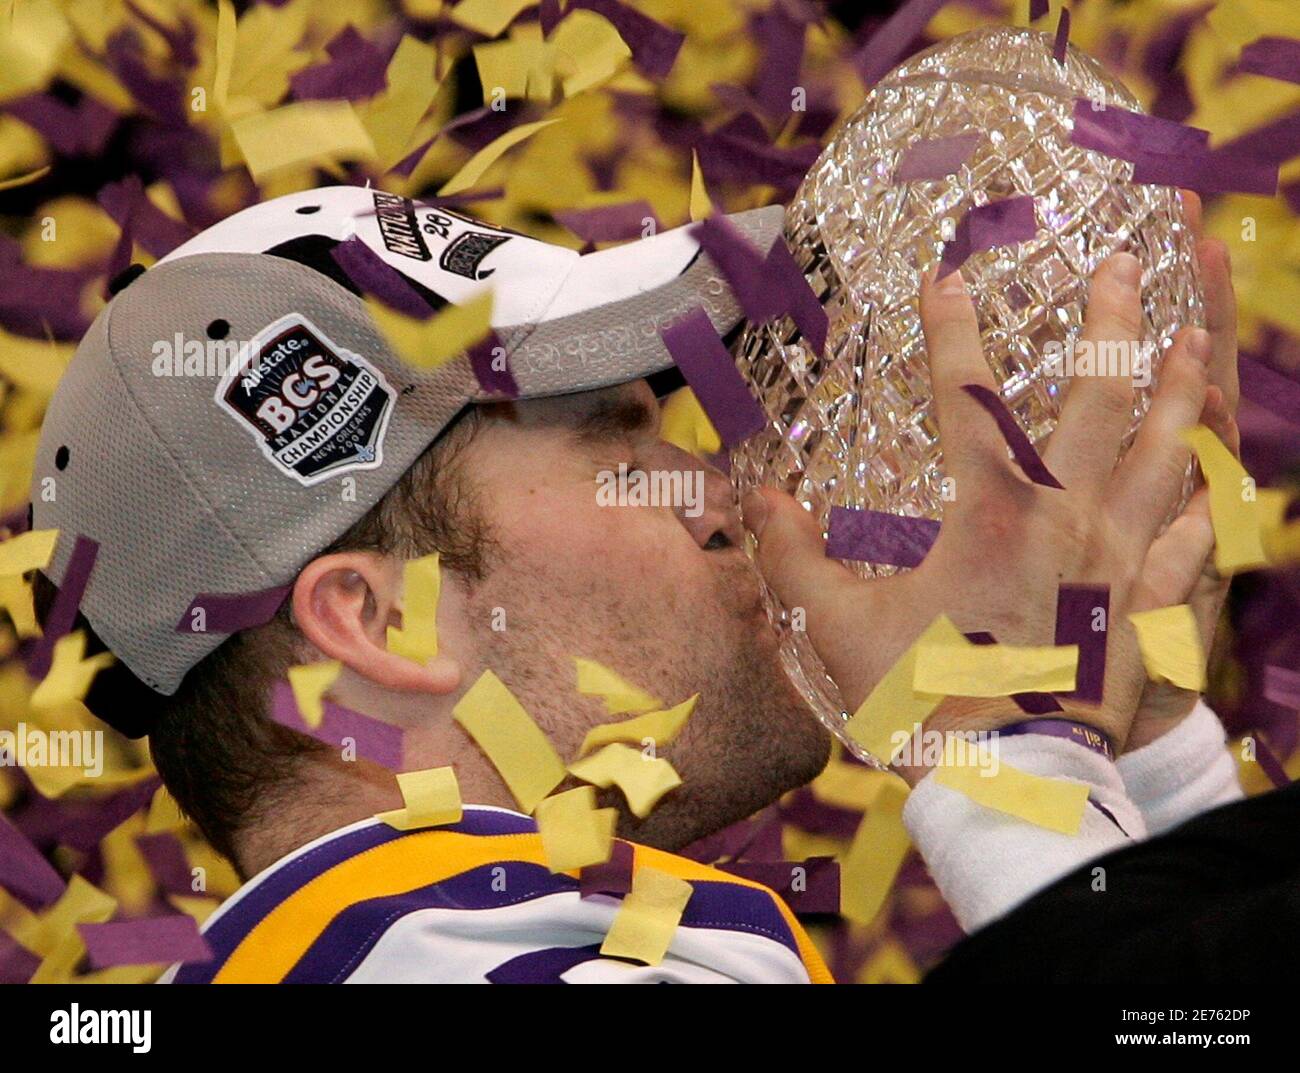 LSU Tigers quarterback Matt Flynn kisses the trophy after his team defeated the Ohio State Buckeyes to win the NCAA BCS National Championship football game in New Orleans January 7, 2008.     REUTERS/Jeff Haynes (UNITED STATES) Stock Photo